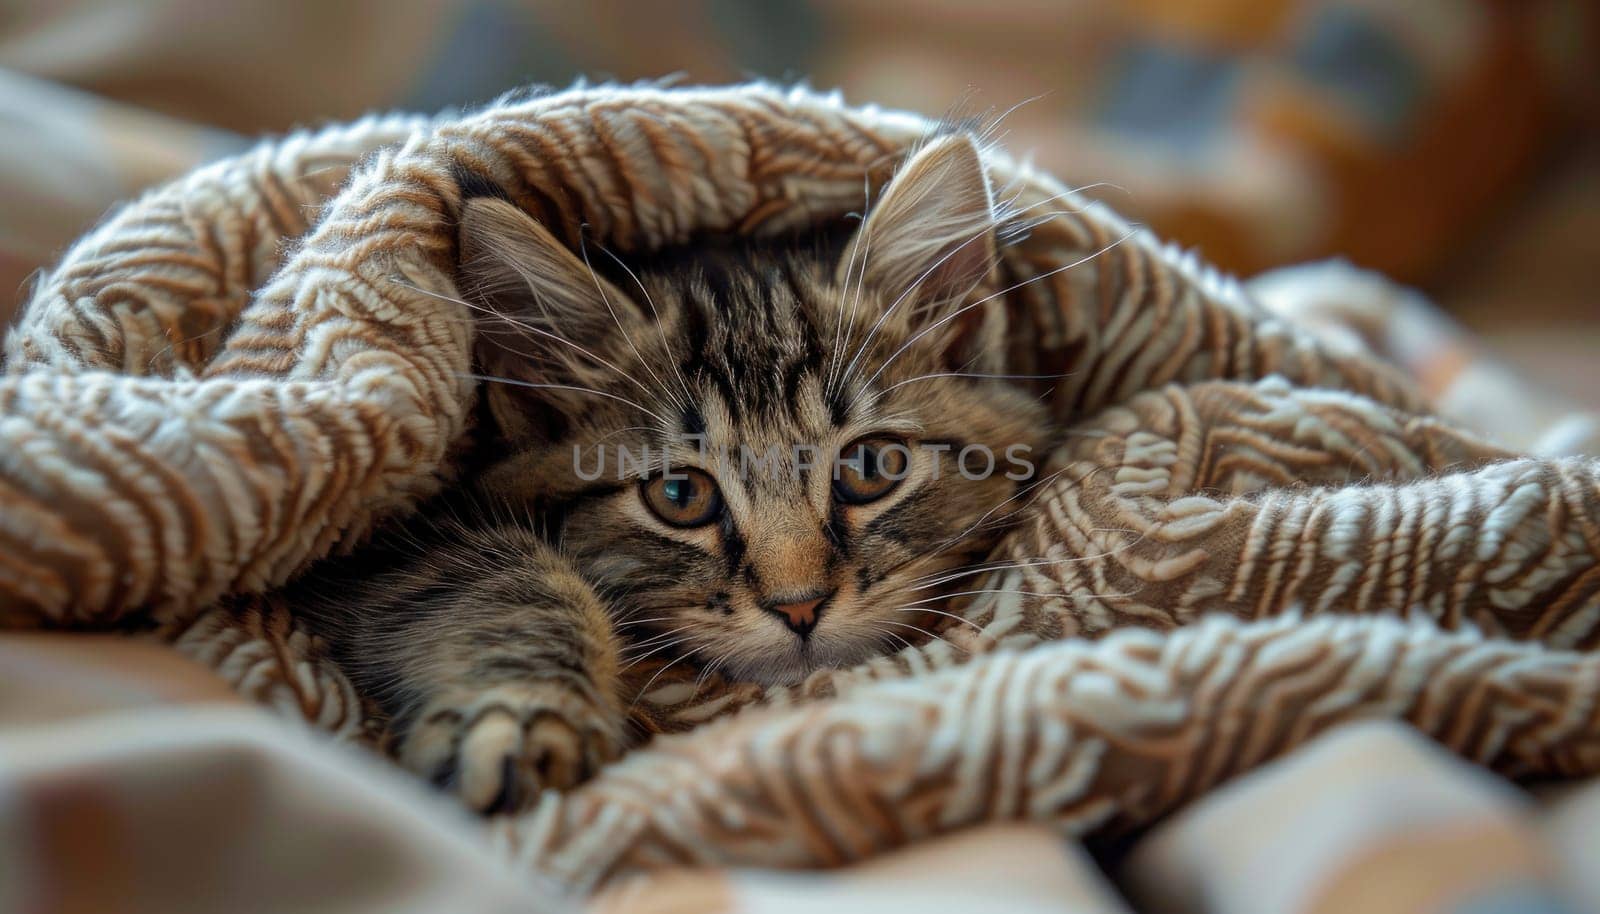 A kitten is curled up in a blanket, looking up at the camera by AI generated image.